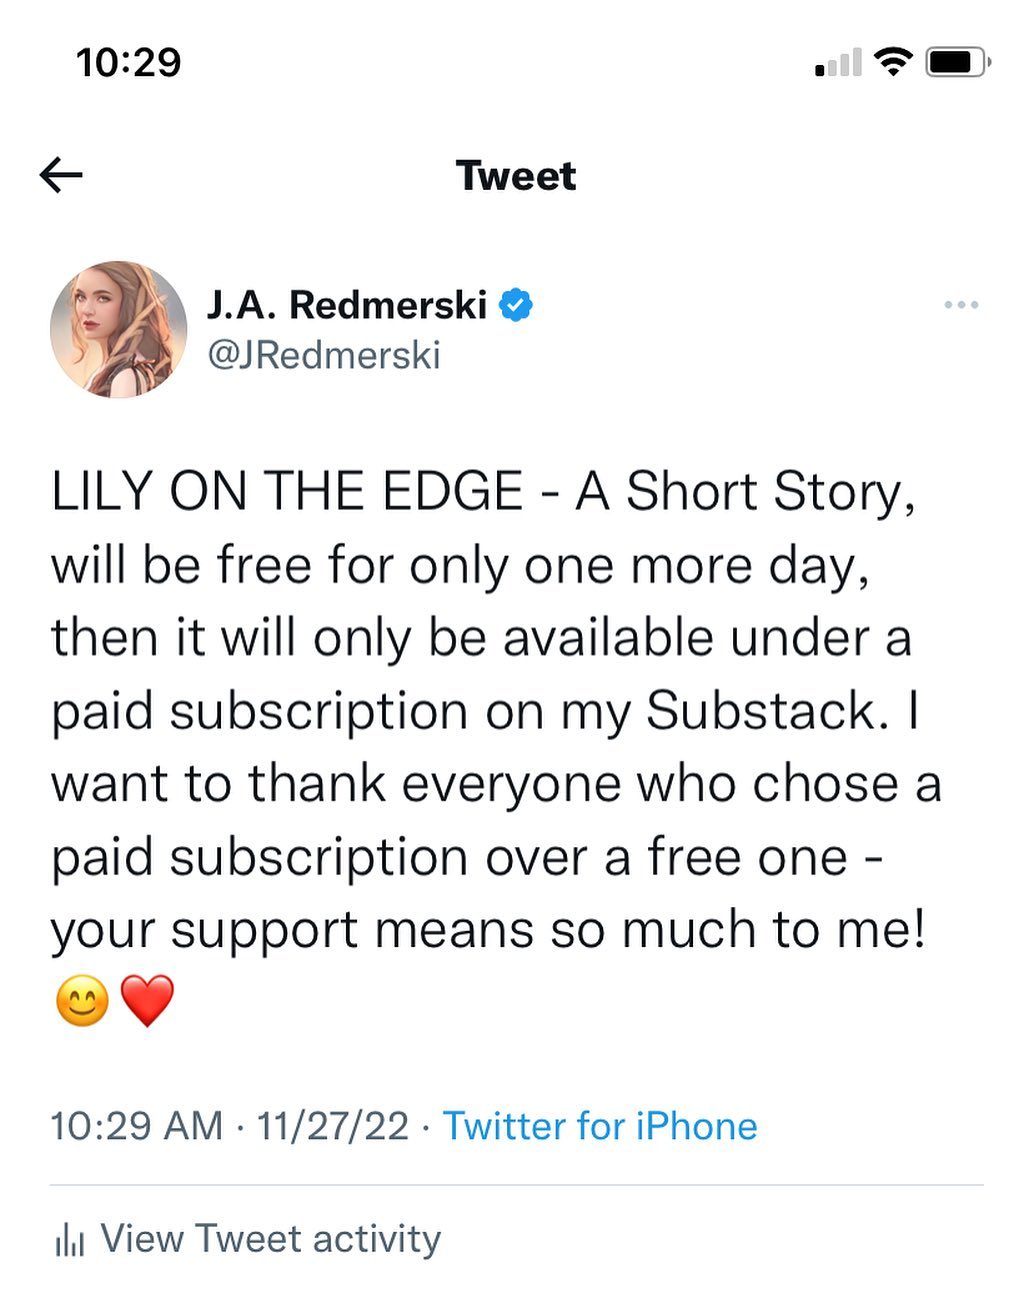 LILY ON THE EDGE - A Short Story, will be free for only one more day, then it will only be available under a paid subscription on my Substack. I want to thank everyone who chose a paid subscription over a free one - your support means so much to me! 😊❤️